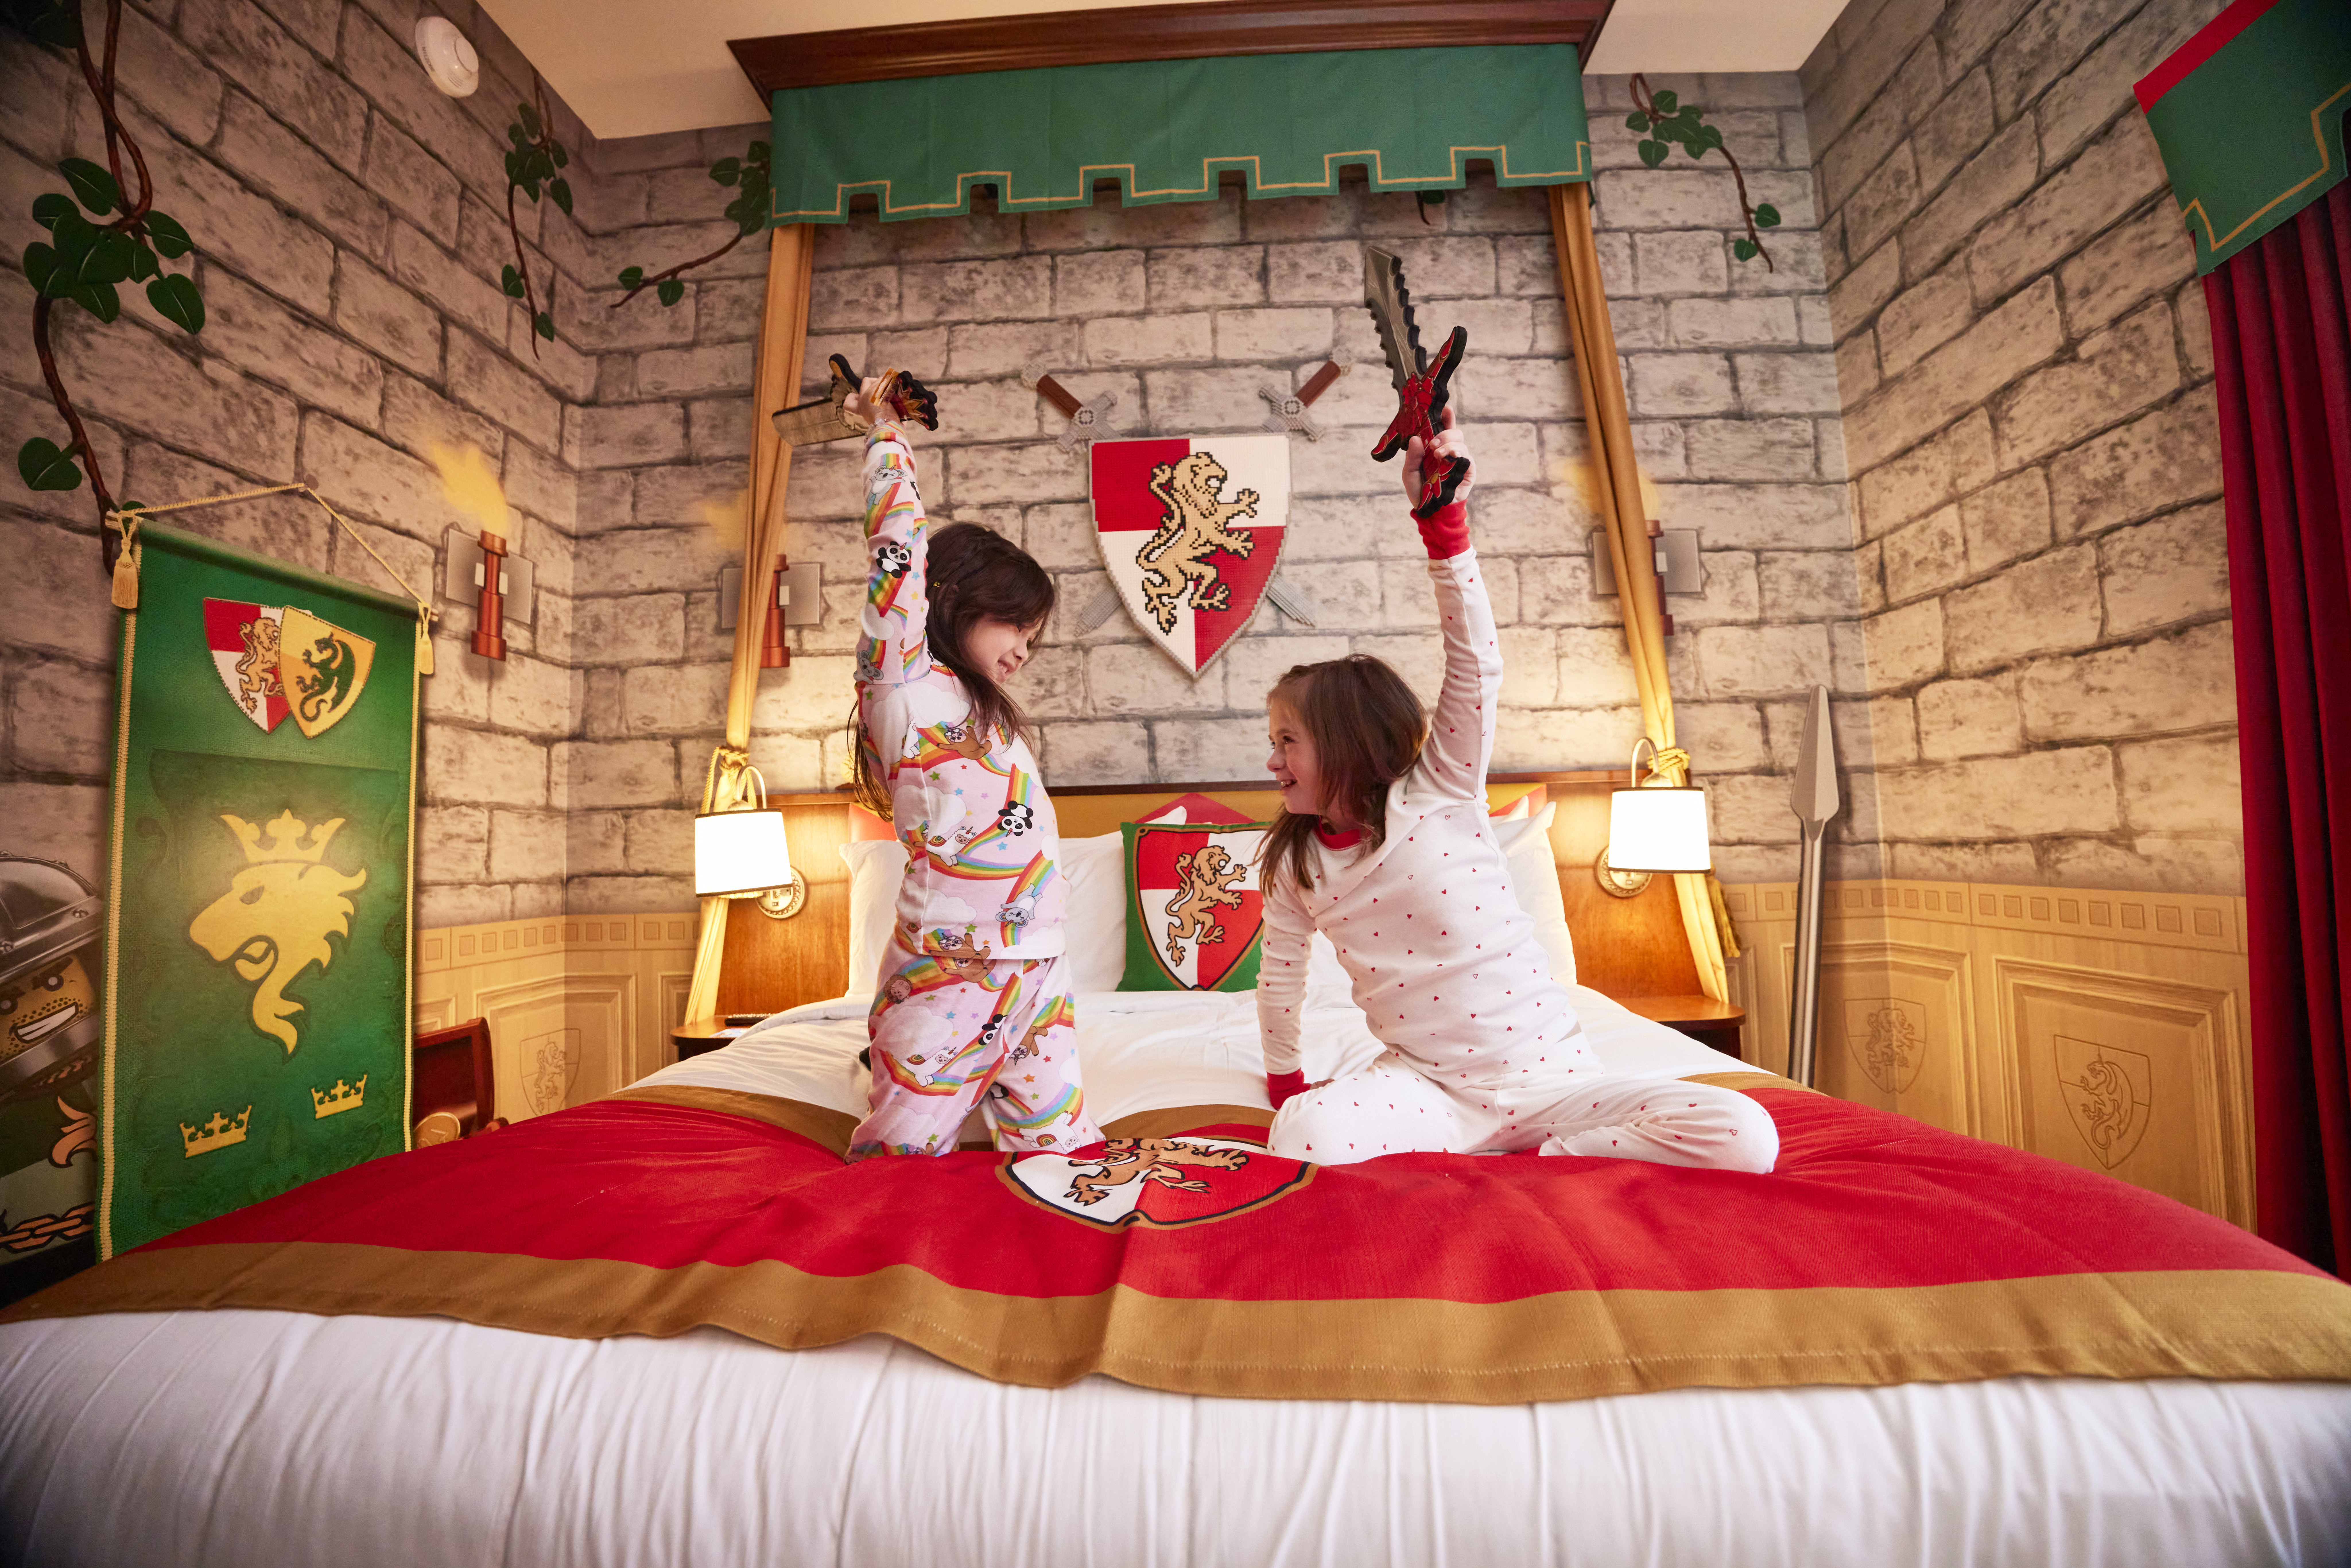 Kids playing on a Kingdom room bed